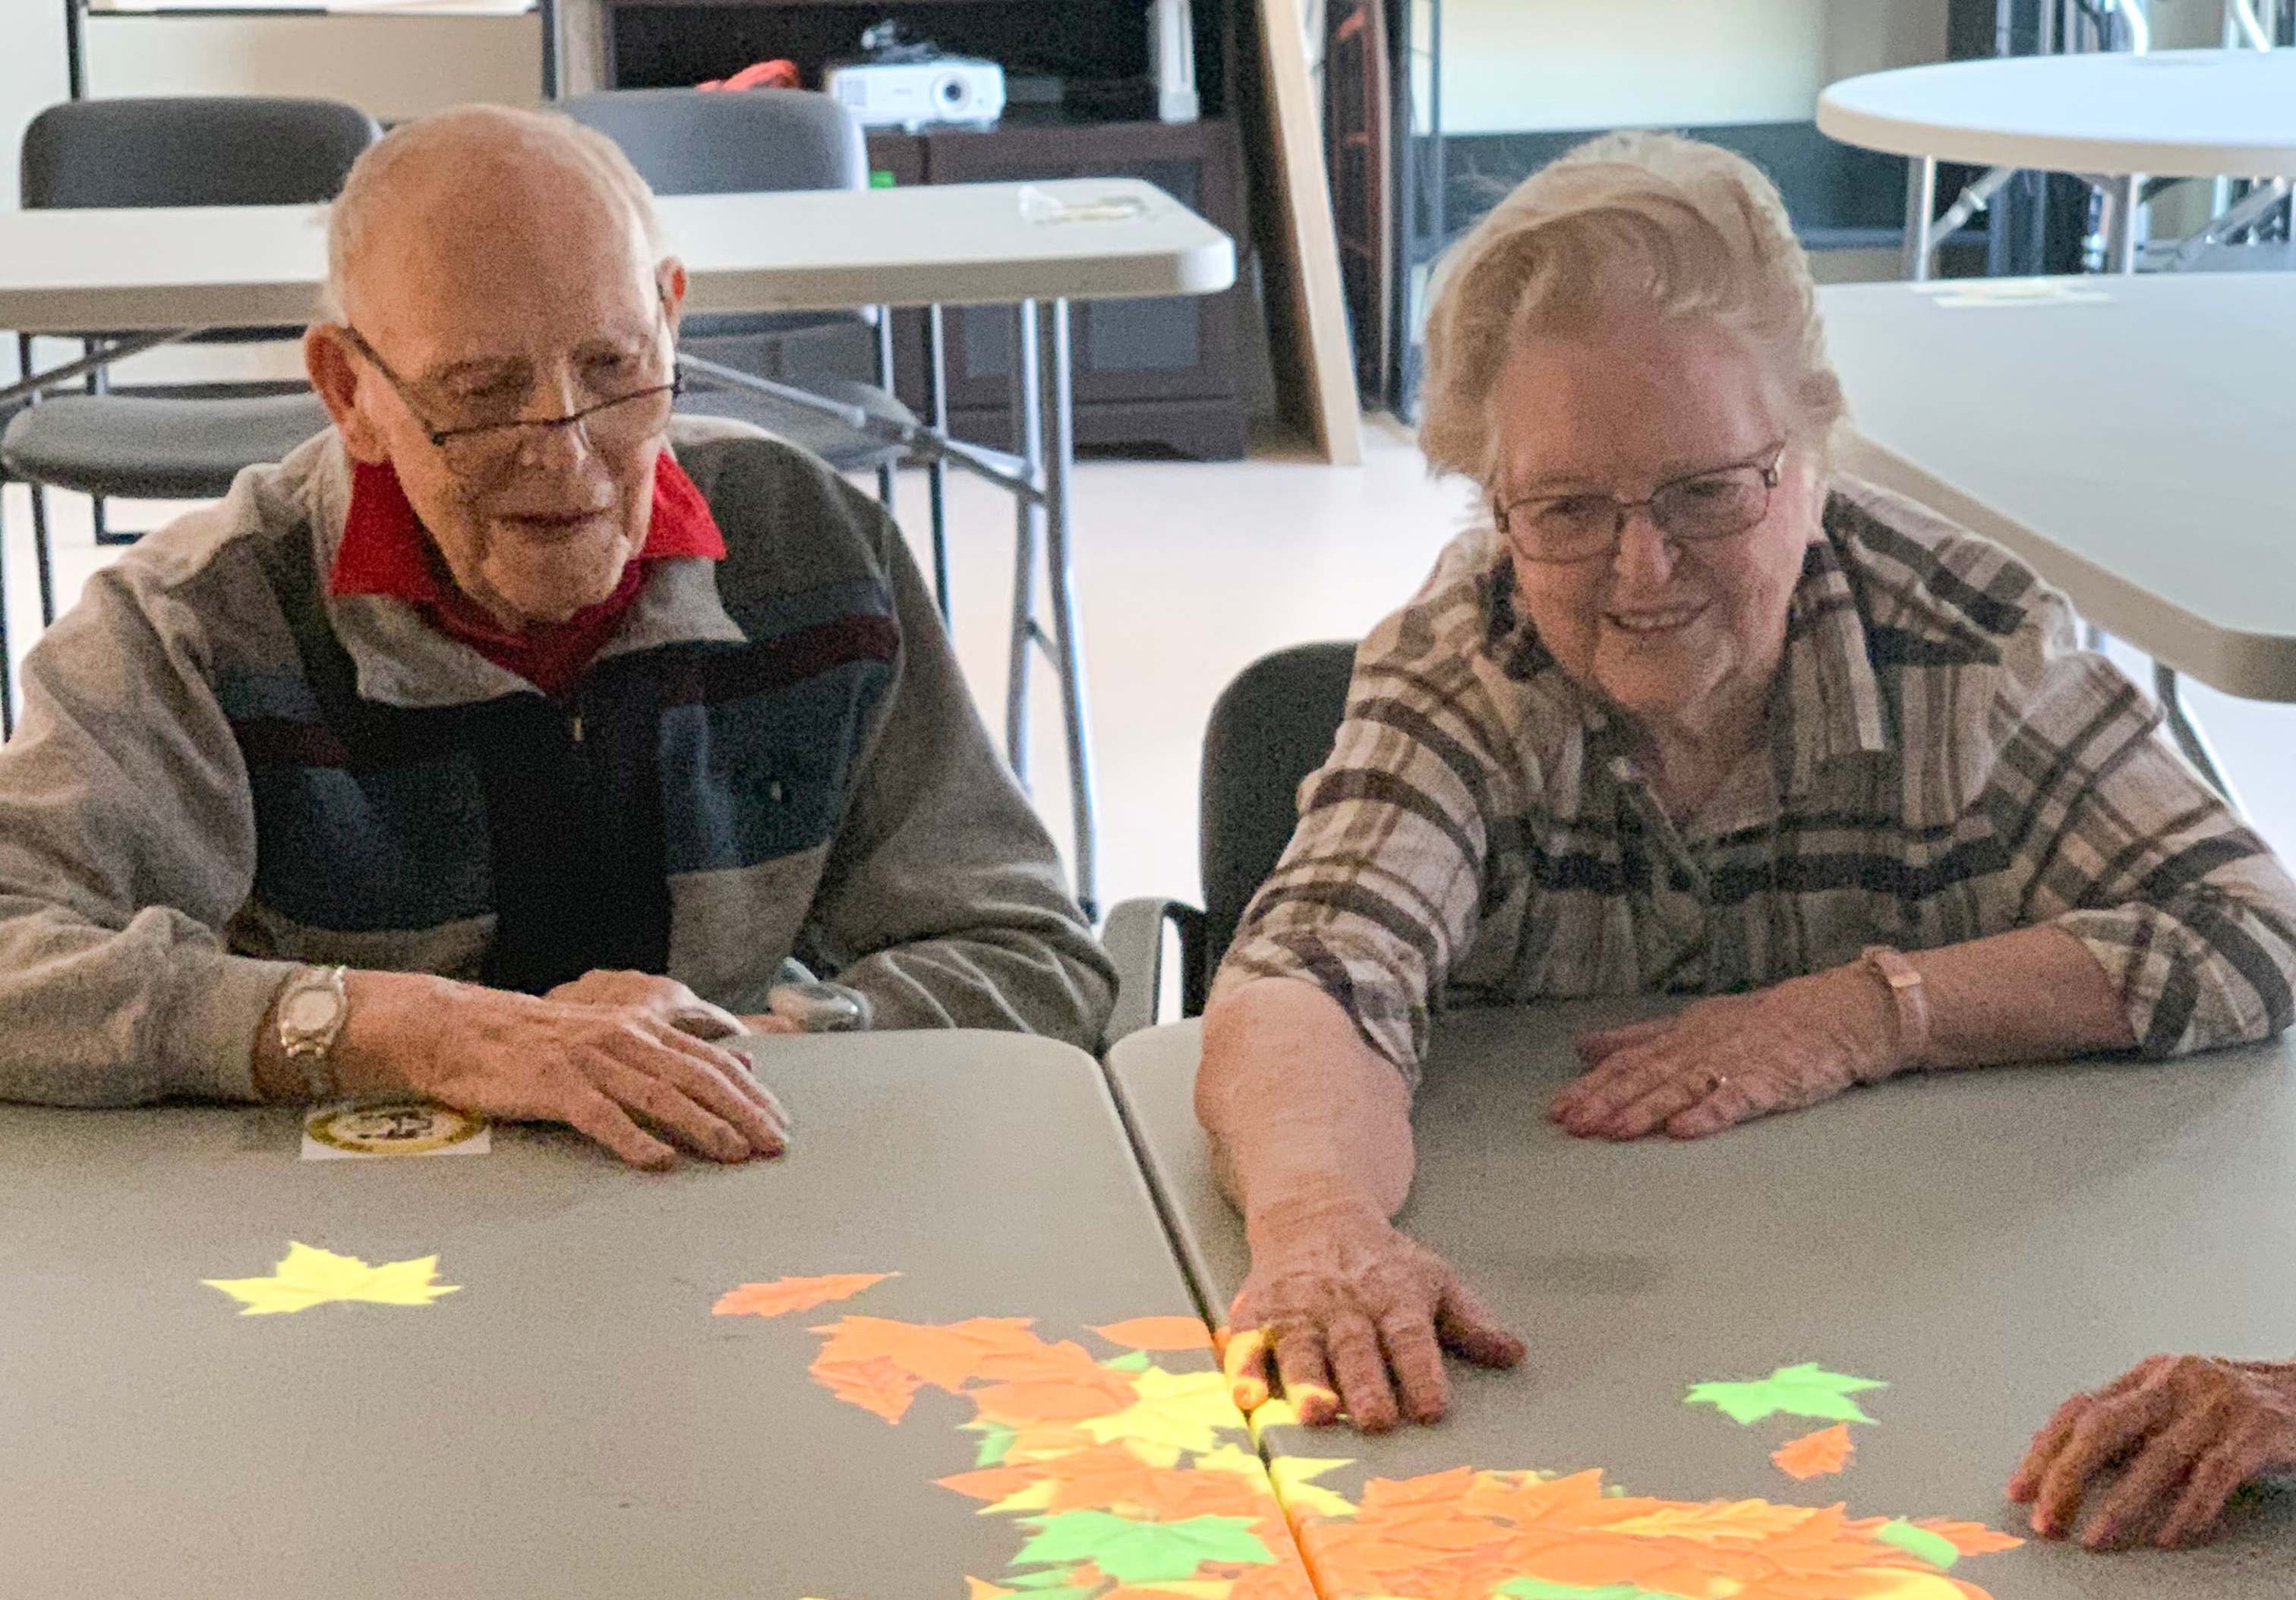 Two elderly Covenant residents play with the Tovertafel display on a table